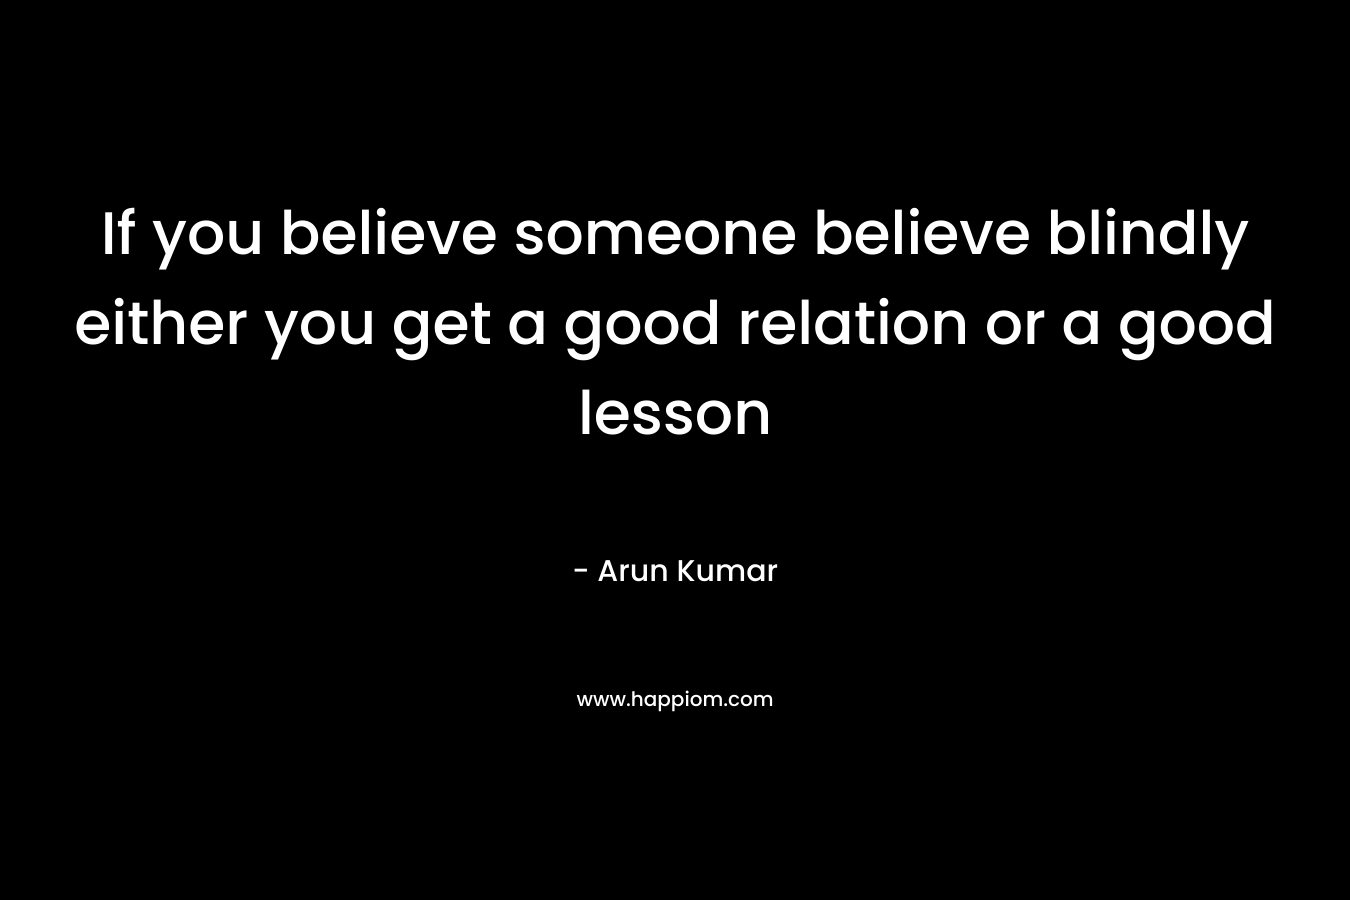 If you believe someone believe blindly either you get a good relation or a good lesson – Arun Kumar